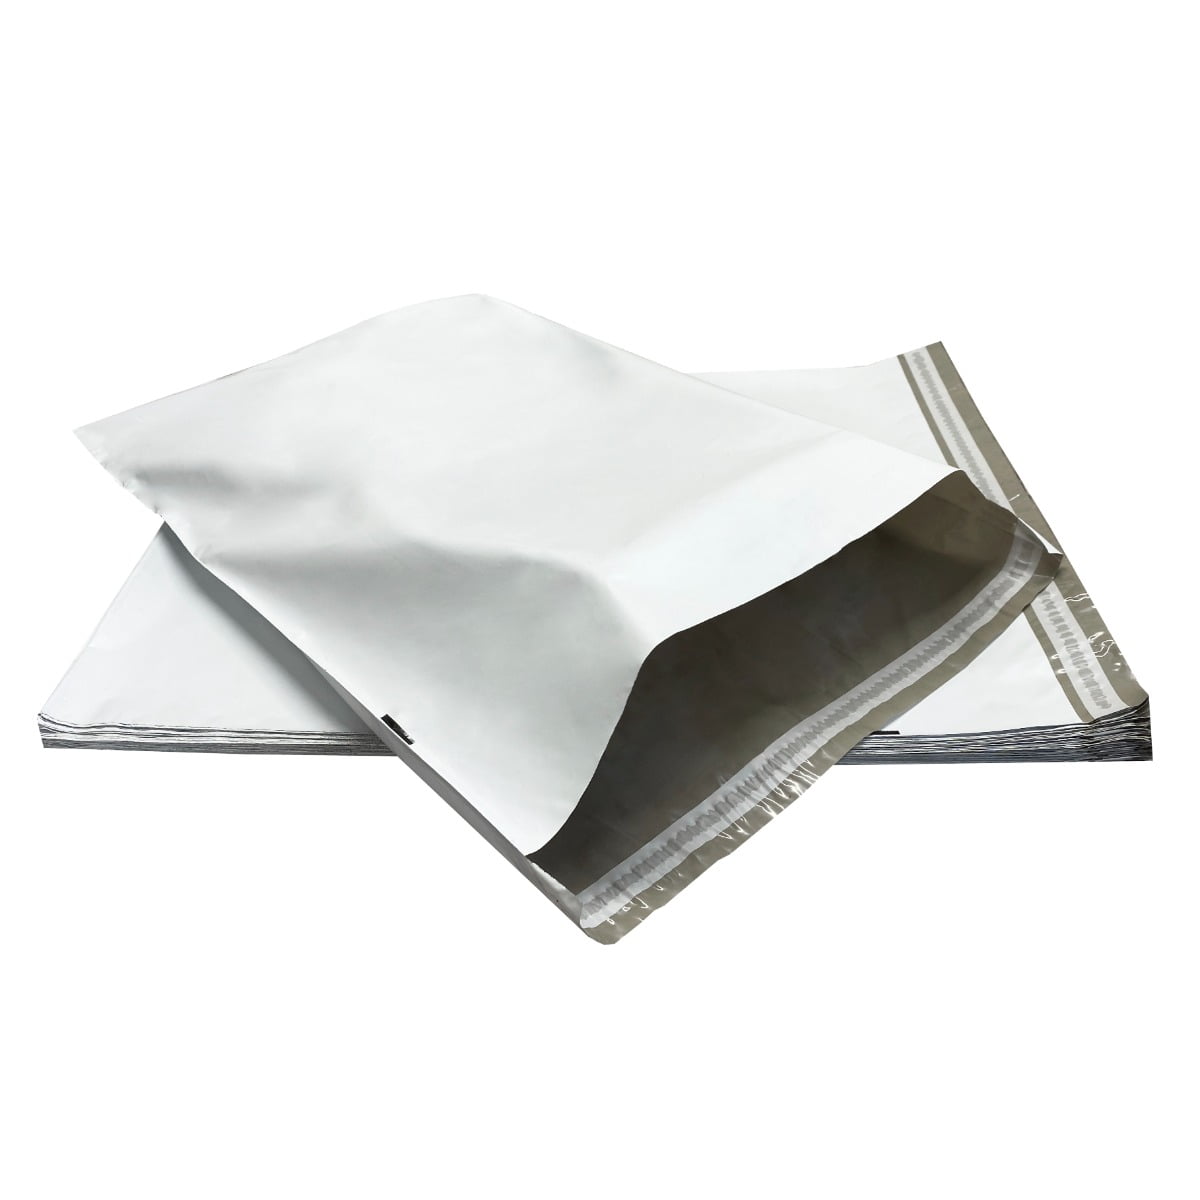 6 x 9" inch White Small Mailing Bags Extra Strong Seal Post Parcel Packing 